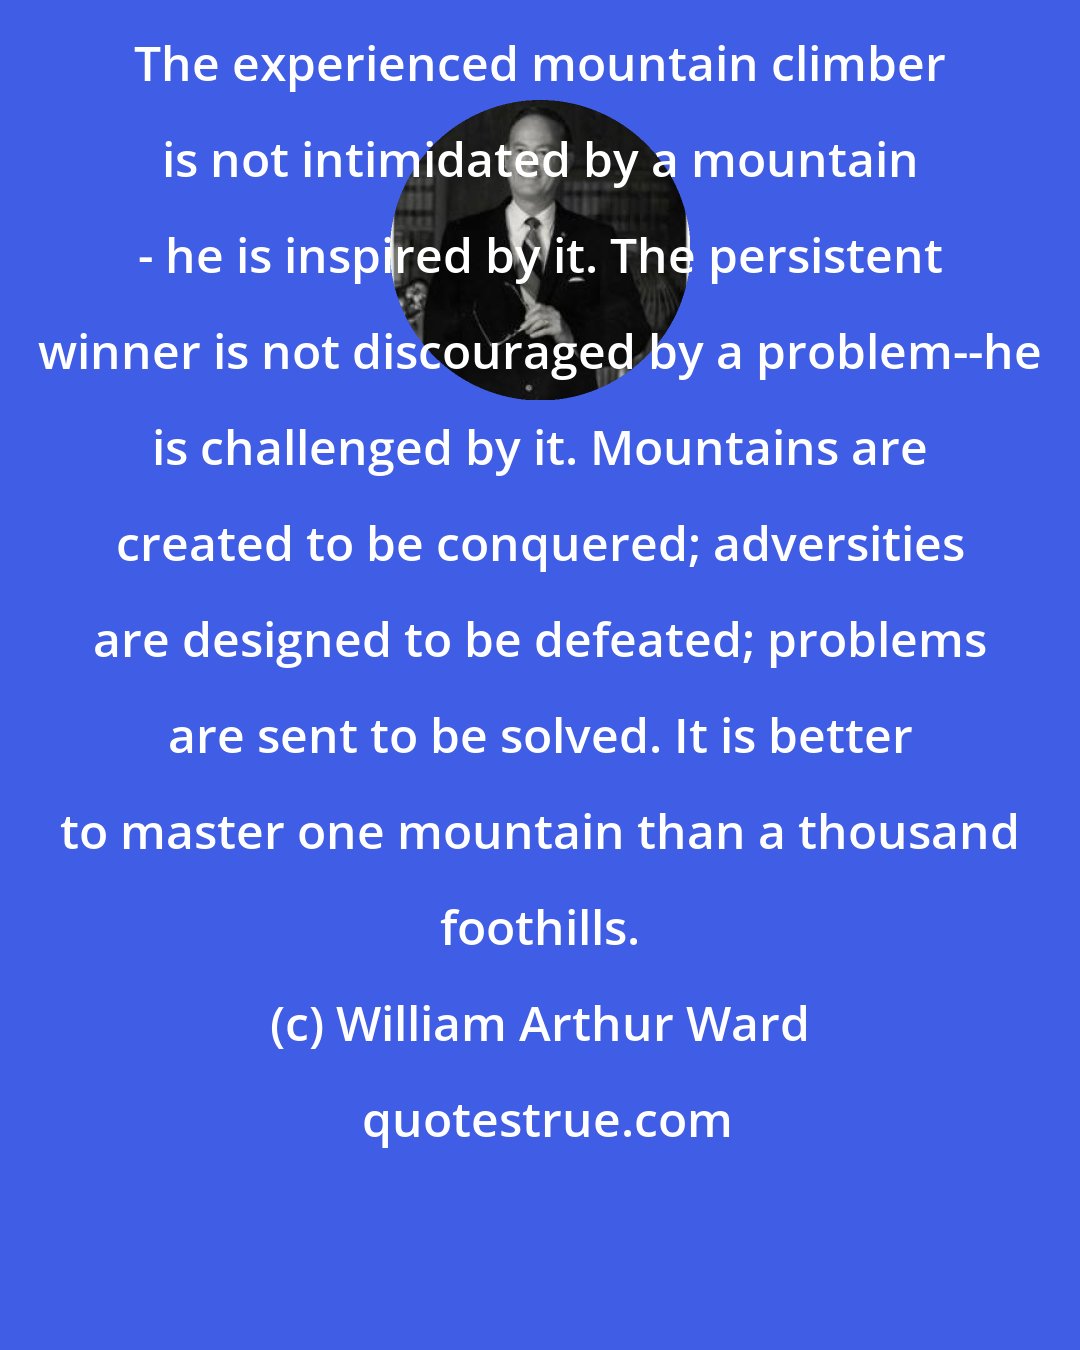 William Arthur Ward: The experienced mountain climber is not intimidated by a mountain - he is inspired by it. The persistent winner is not discouraged by a problem--he is challenged by it. Mountains are created to be conquered; adversities are designed to be defeated; problems are sent to be solved. It is better to master one mountain than a thousand foothills.